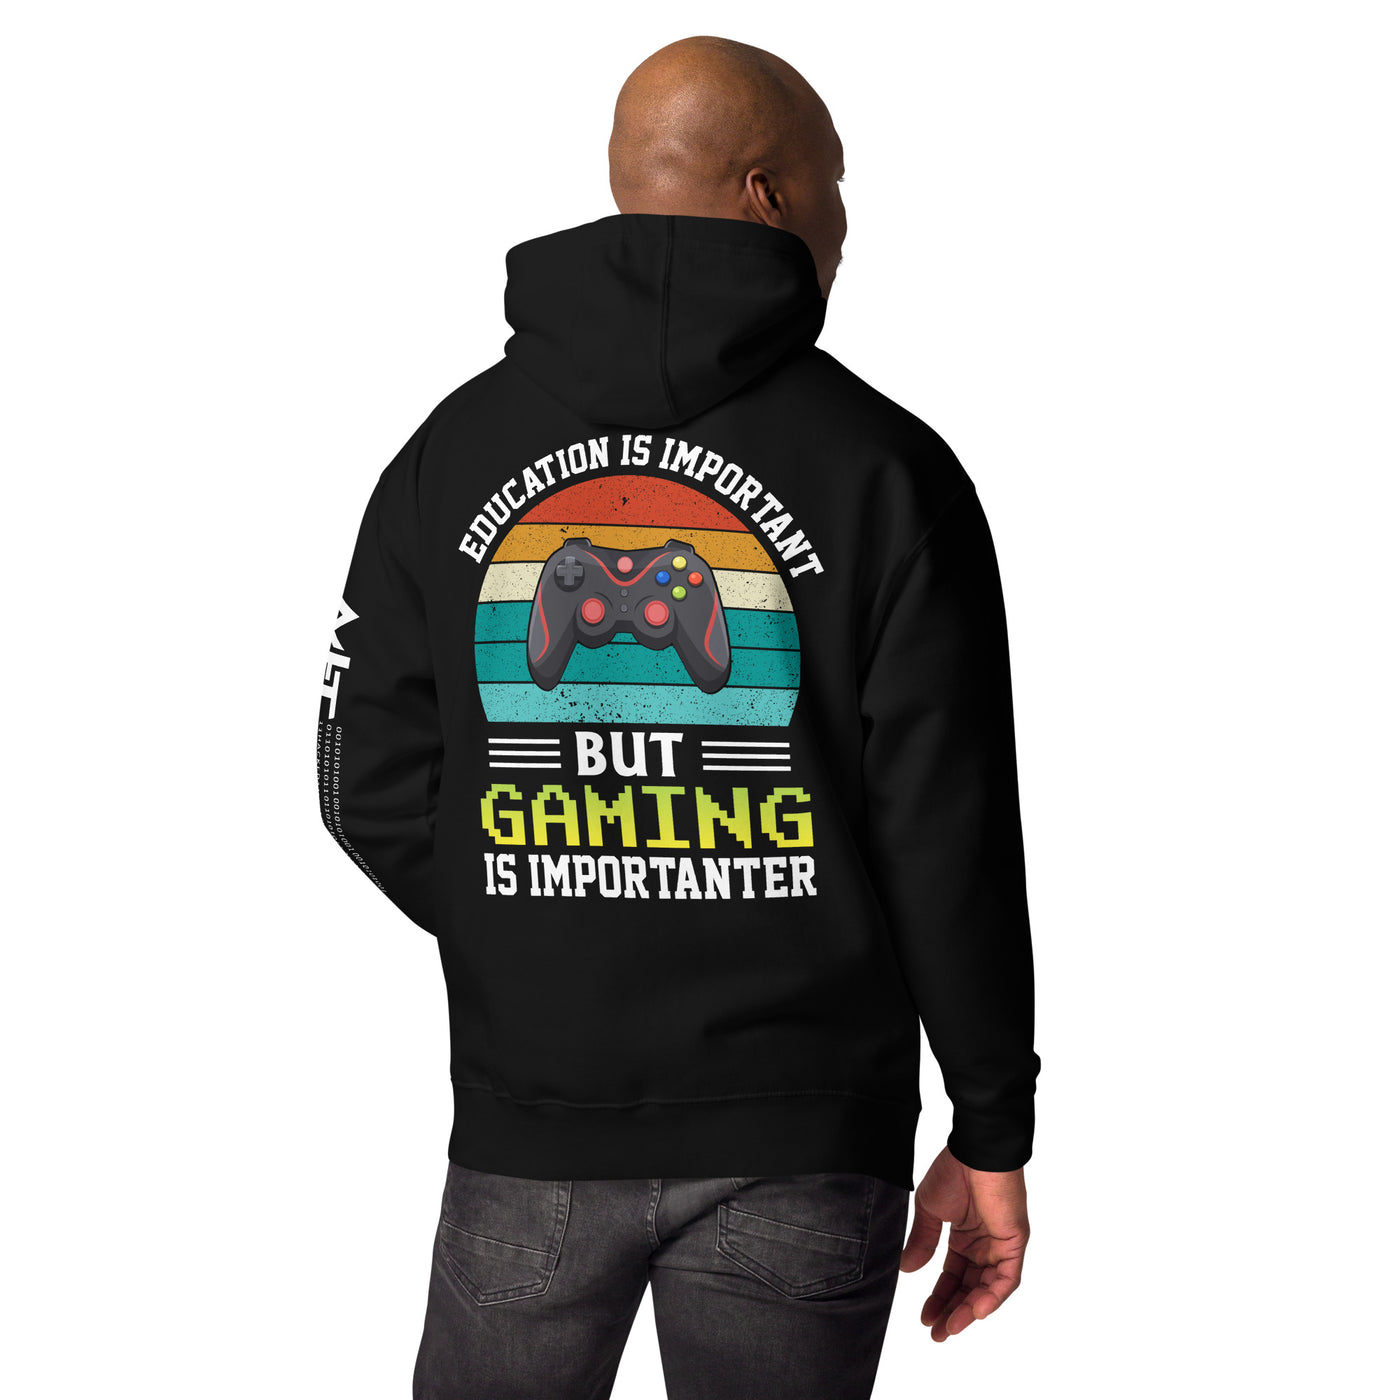 Education is Important, but Gaming is importanter - Unisex Hoodie ( Back Print )